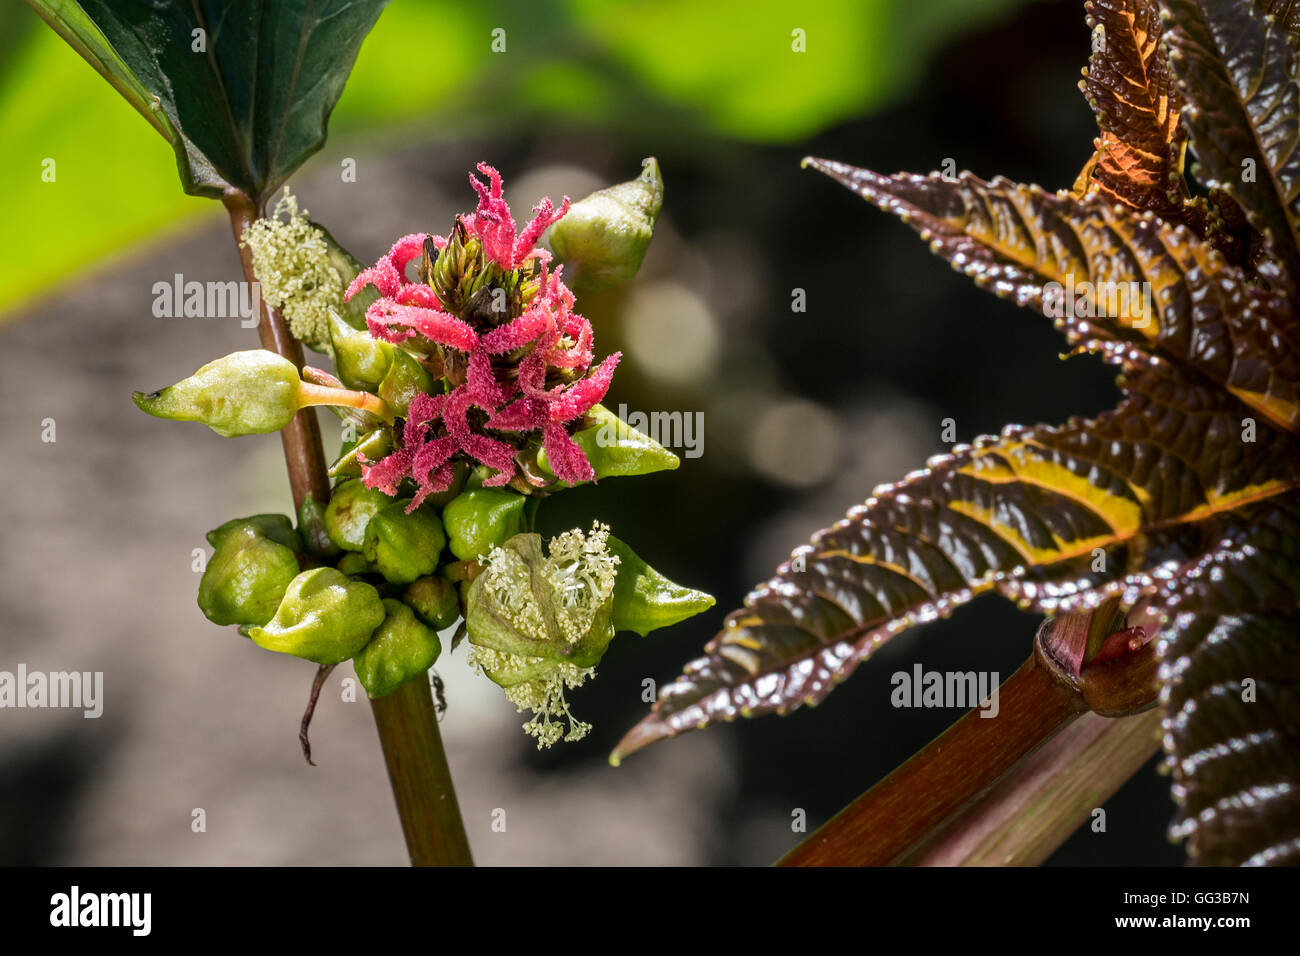 Female flowers of castorbean / castor-oil-plant (Ricinus communis) indigenous to the Mediterranean, Eastern Africa and India Stock Photo